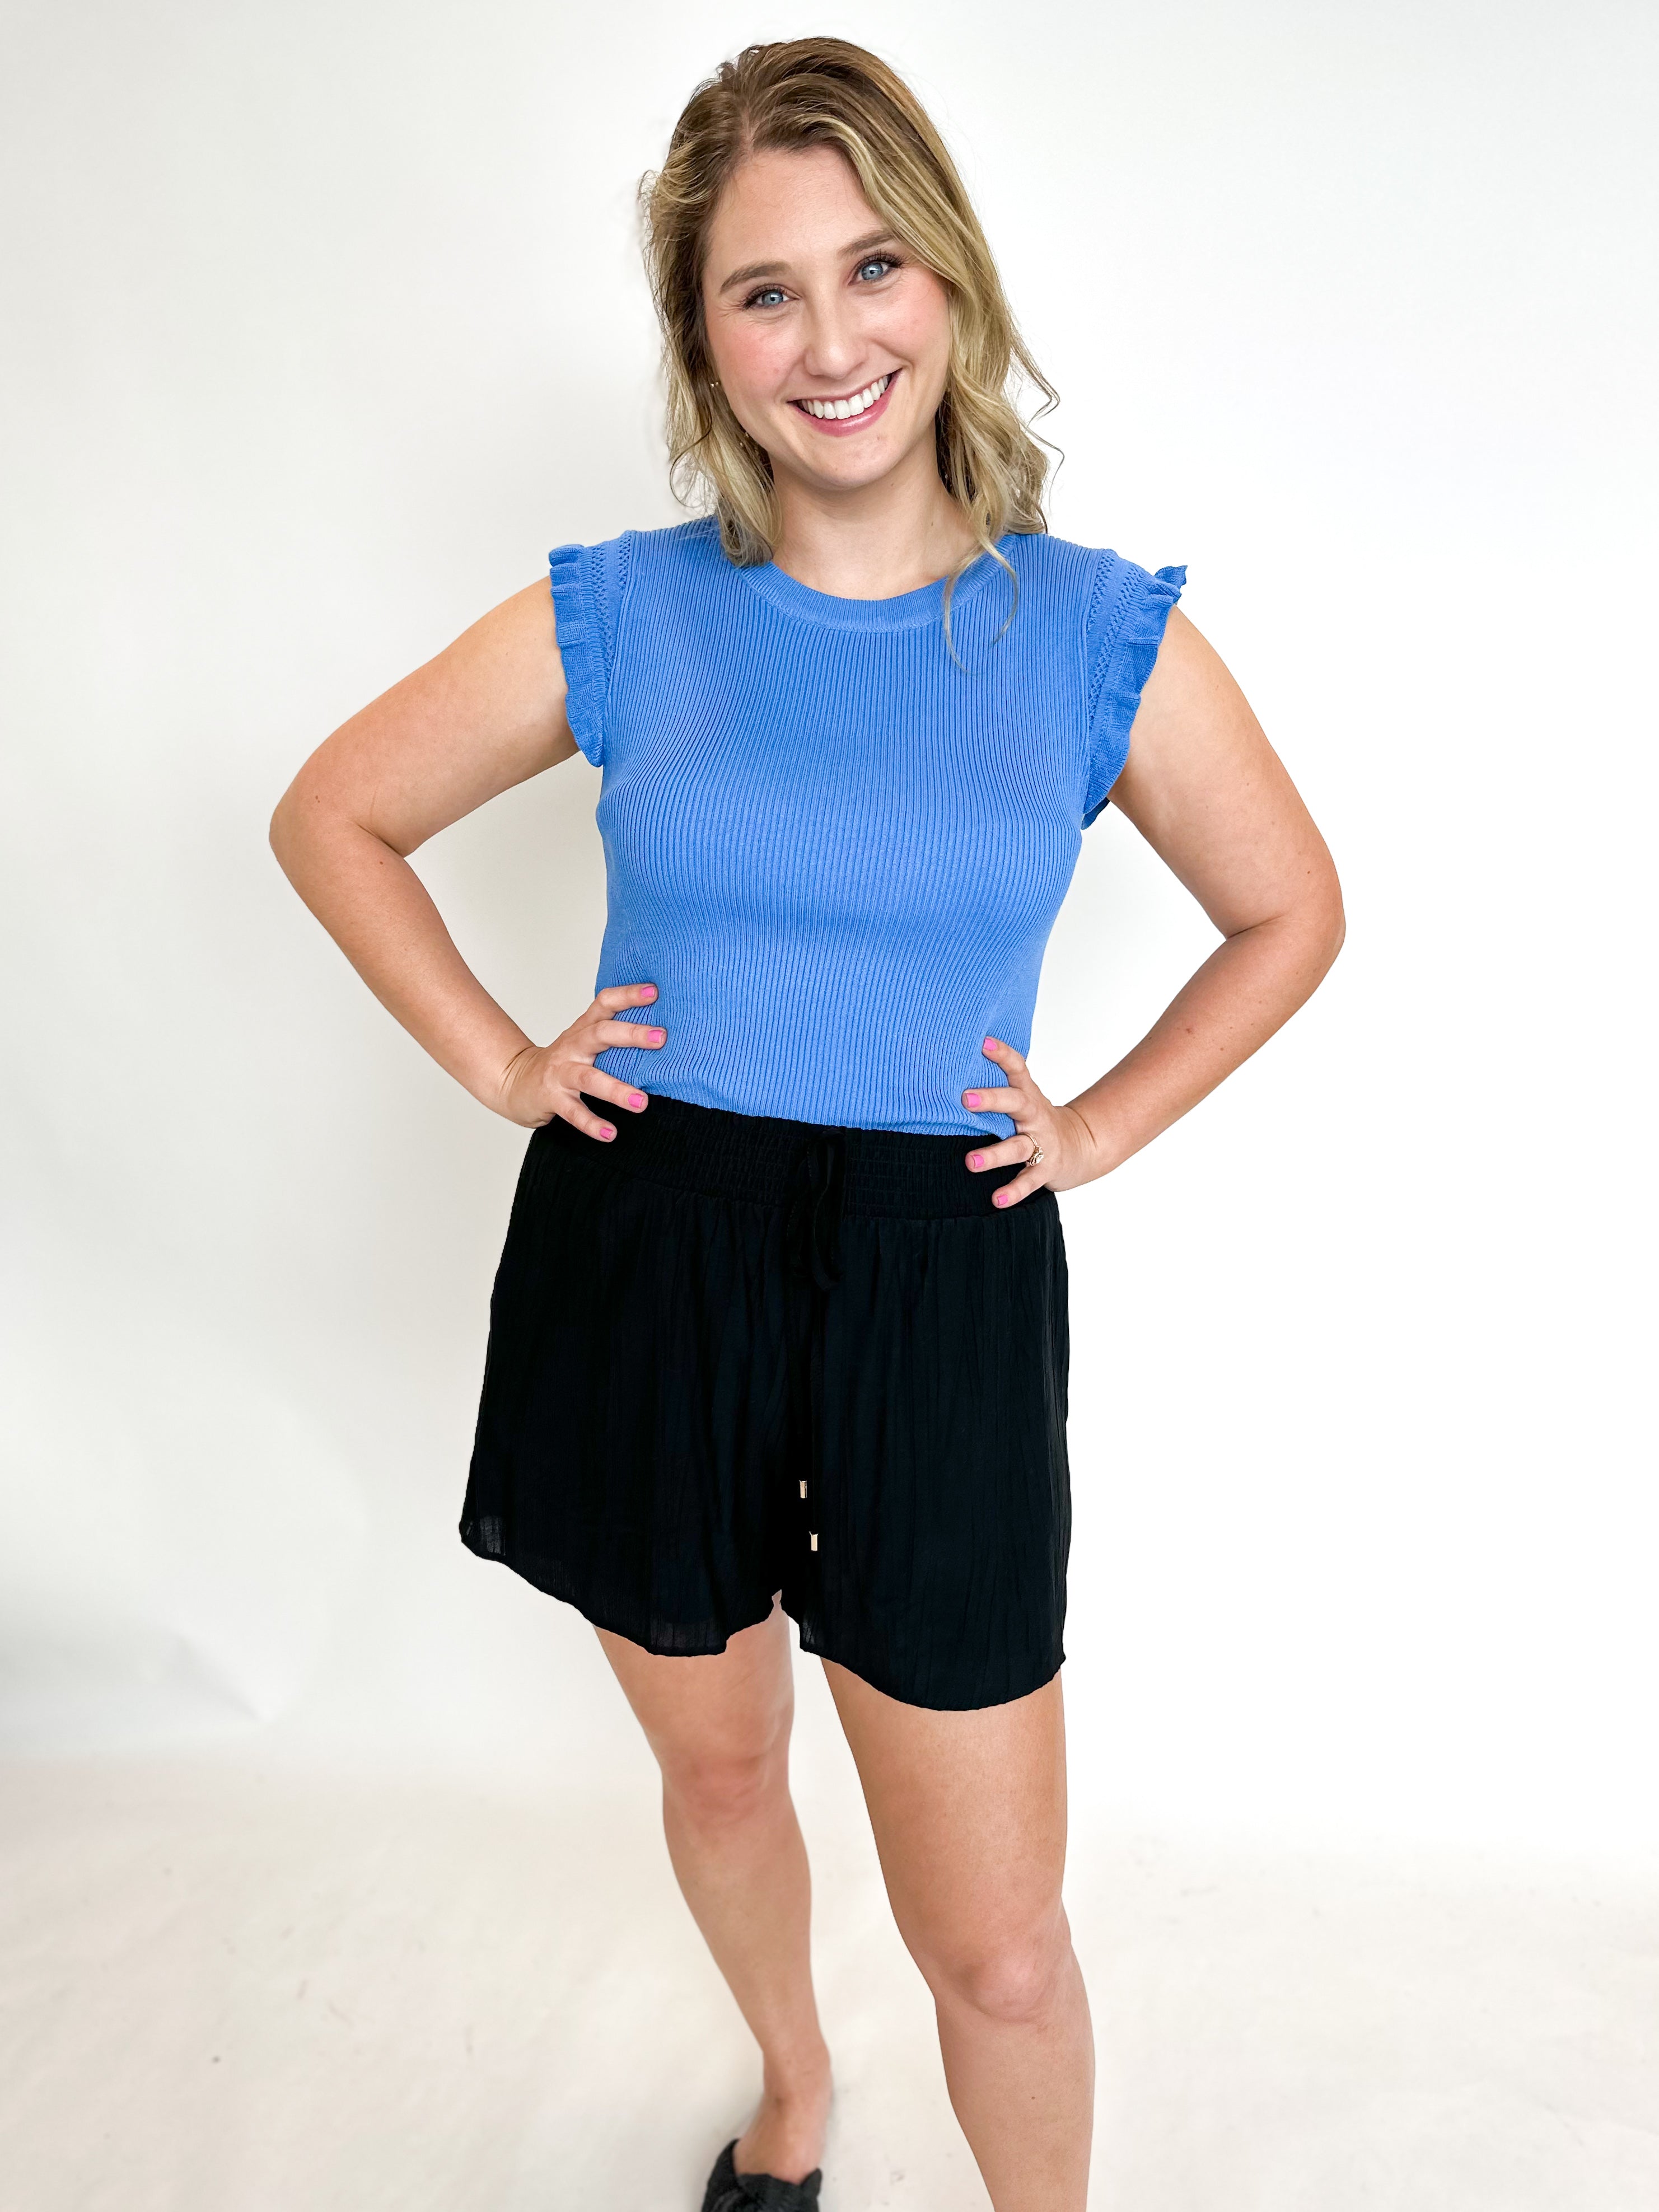 Everyday Comfy Shorts - Black-410 Shorts/Skirts-ALLIE ROSE-July & June Women's Fashion Boutique Located in San Antonio, Texas